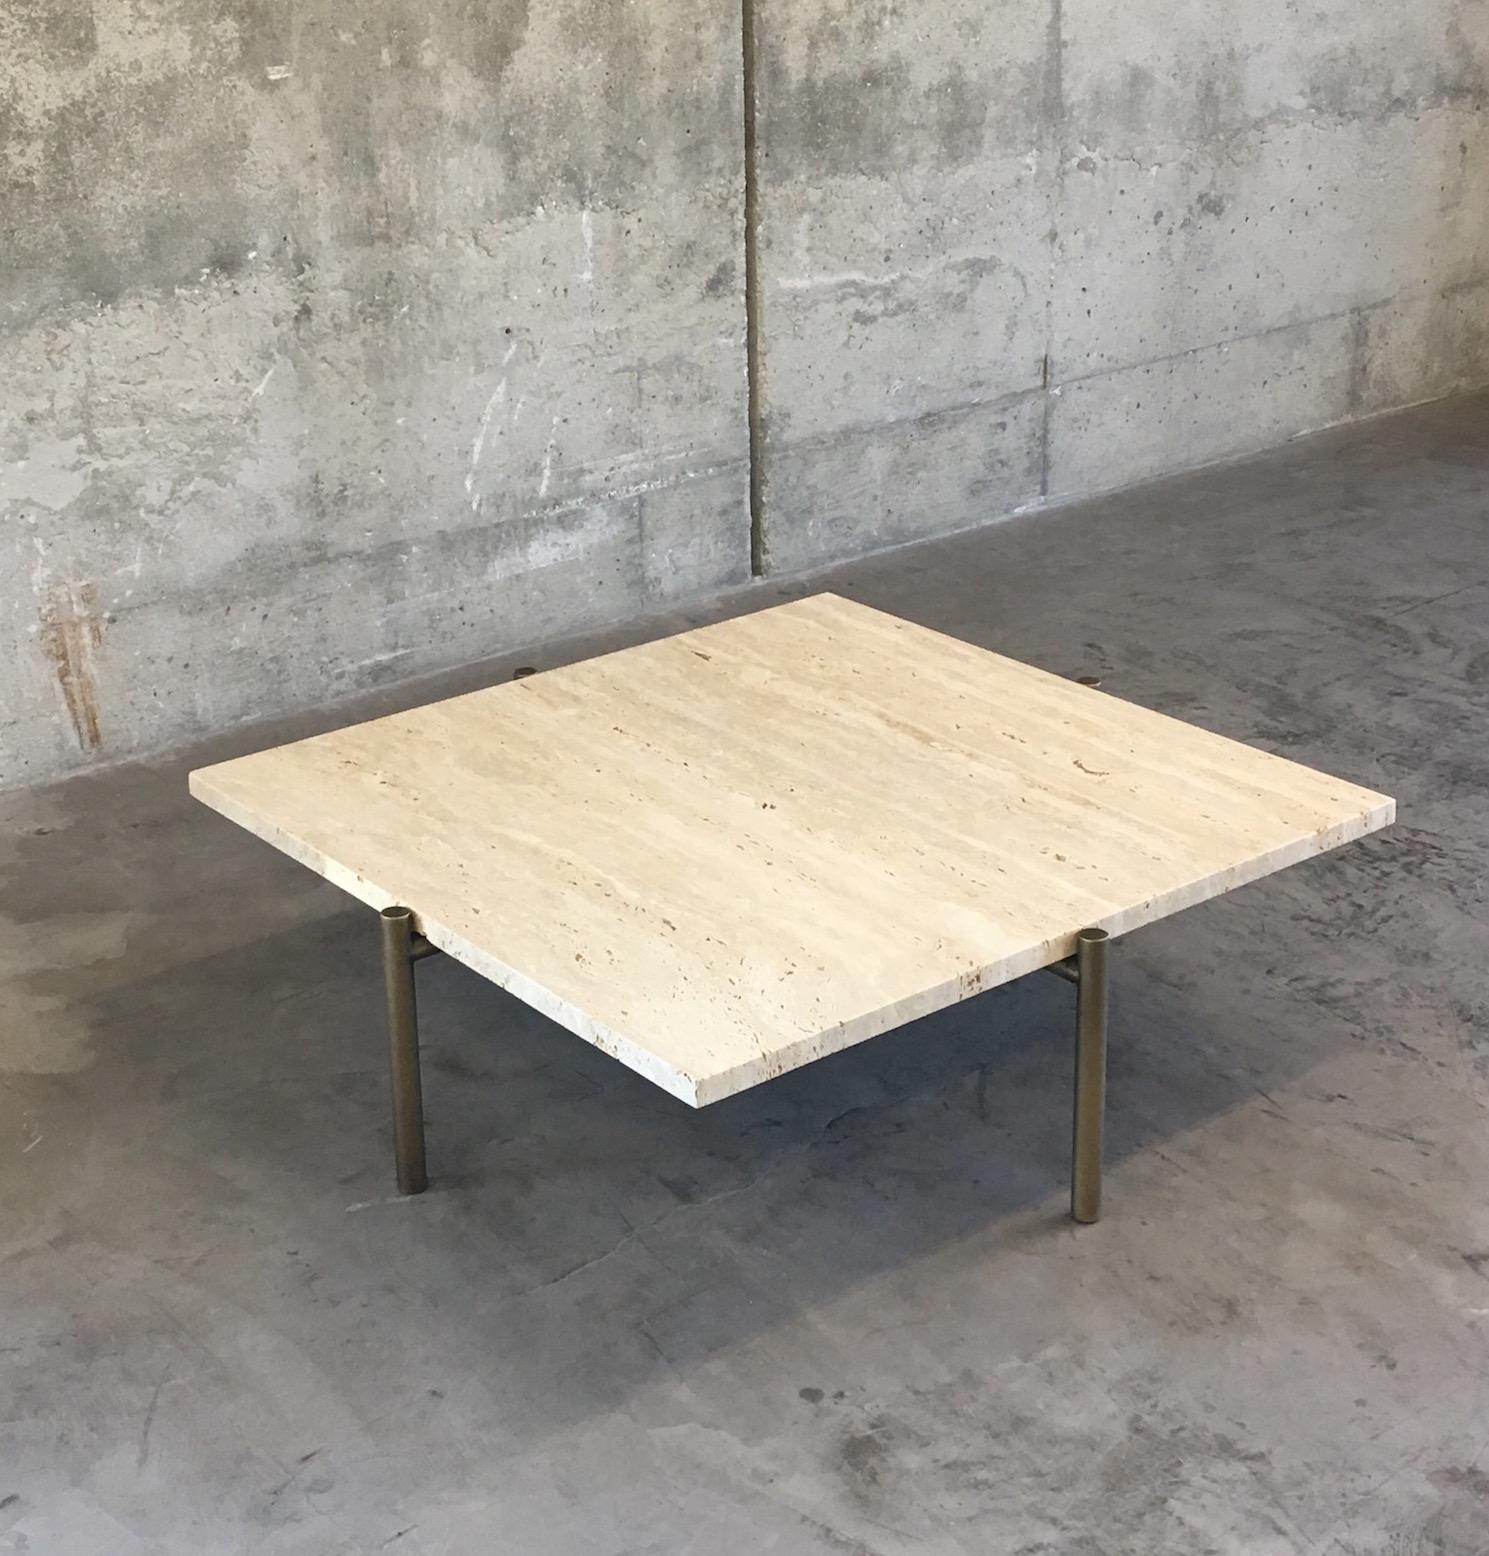 Ten10 Tivoli coffee table with 4 legs and a square travertine top. The base is stainless steel tube plated in brass with a burnished finish. The top is 3cm thick vein cut unfilled honed Roman travertine. The travertine is naturally porous and the